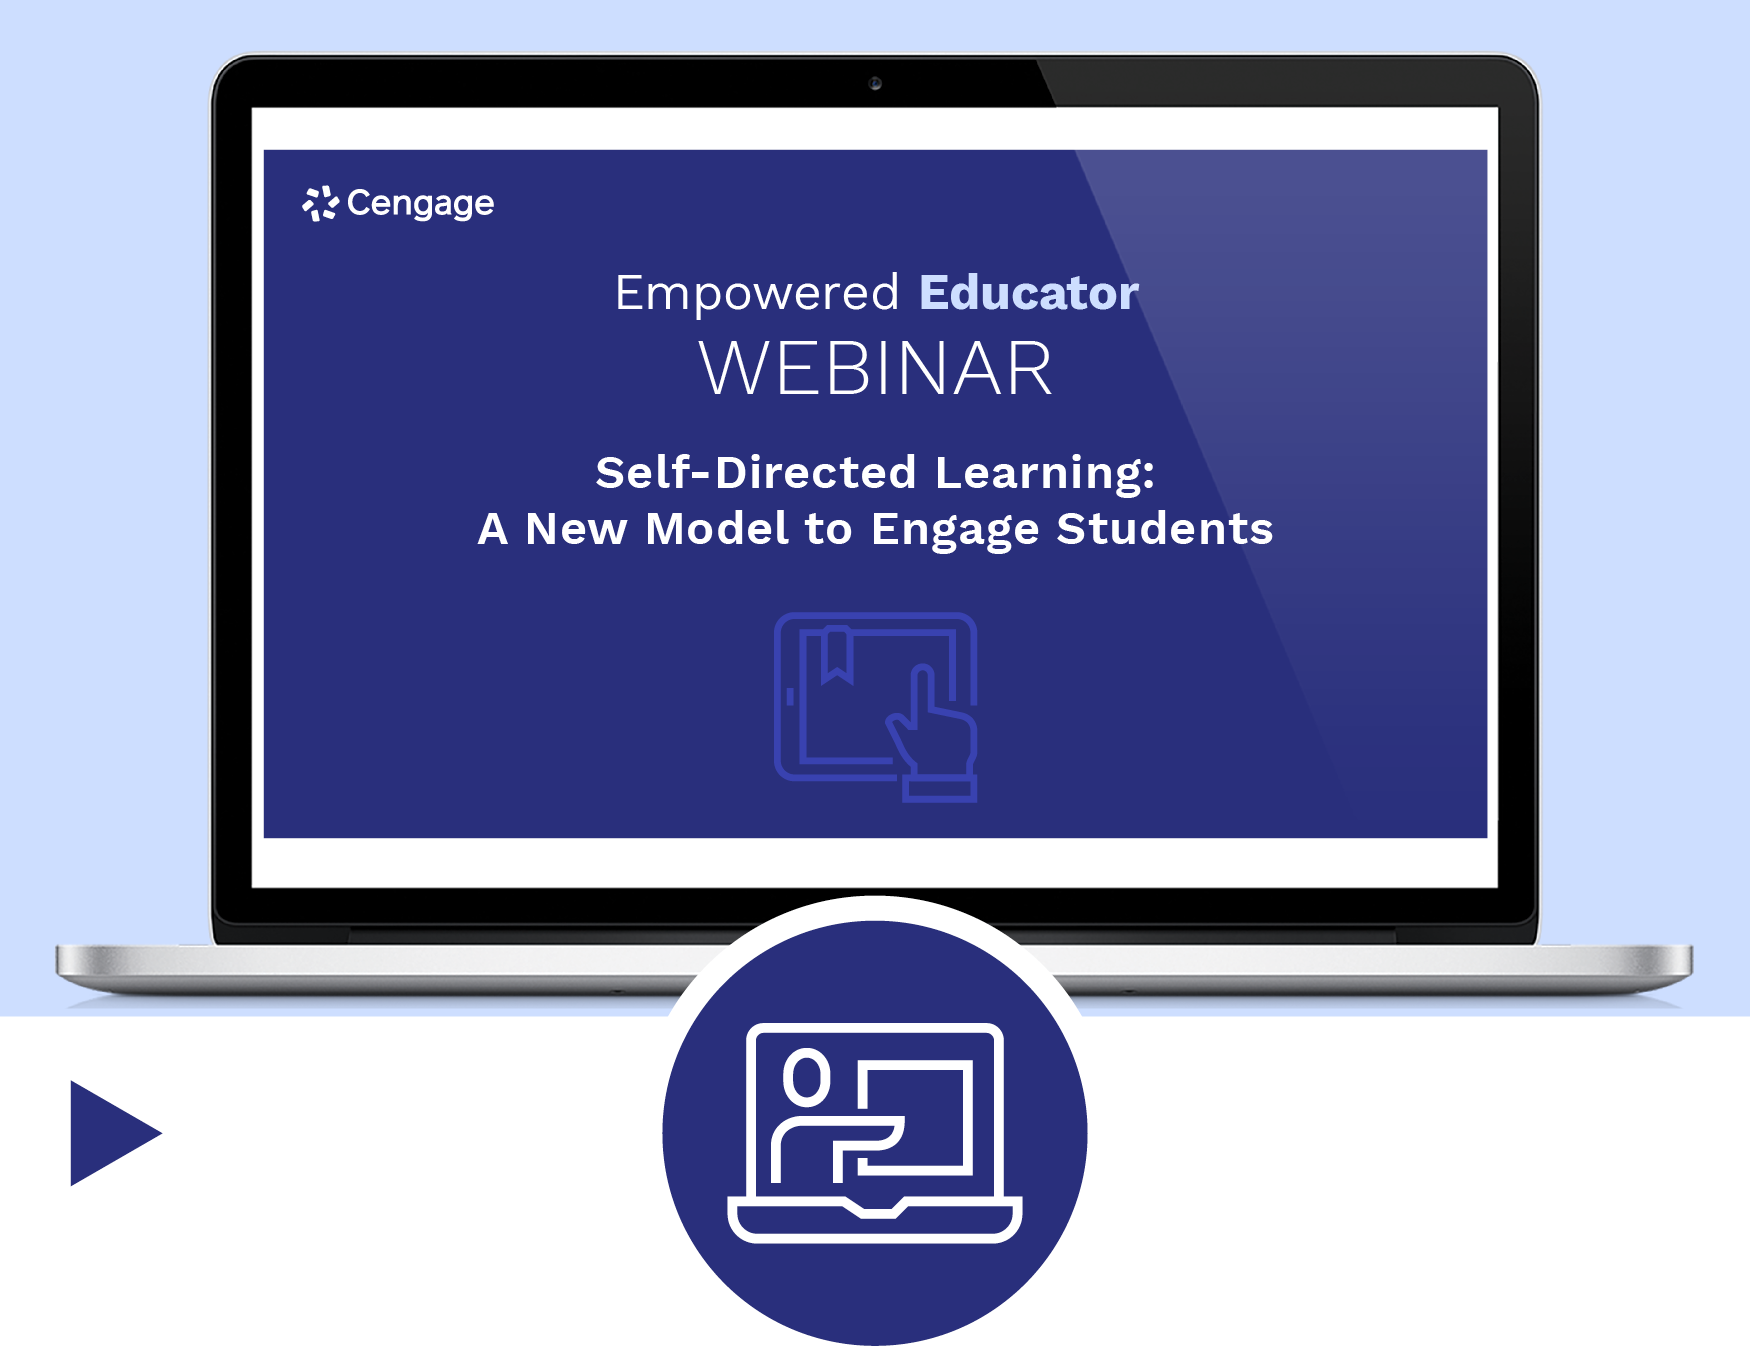 Self-Directed Learning: A New Model to Engage Students<br/><br/>